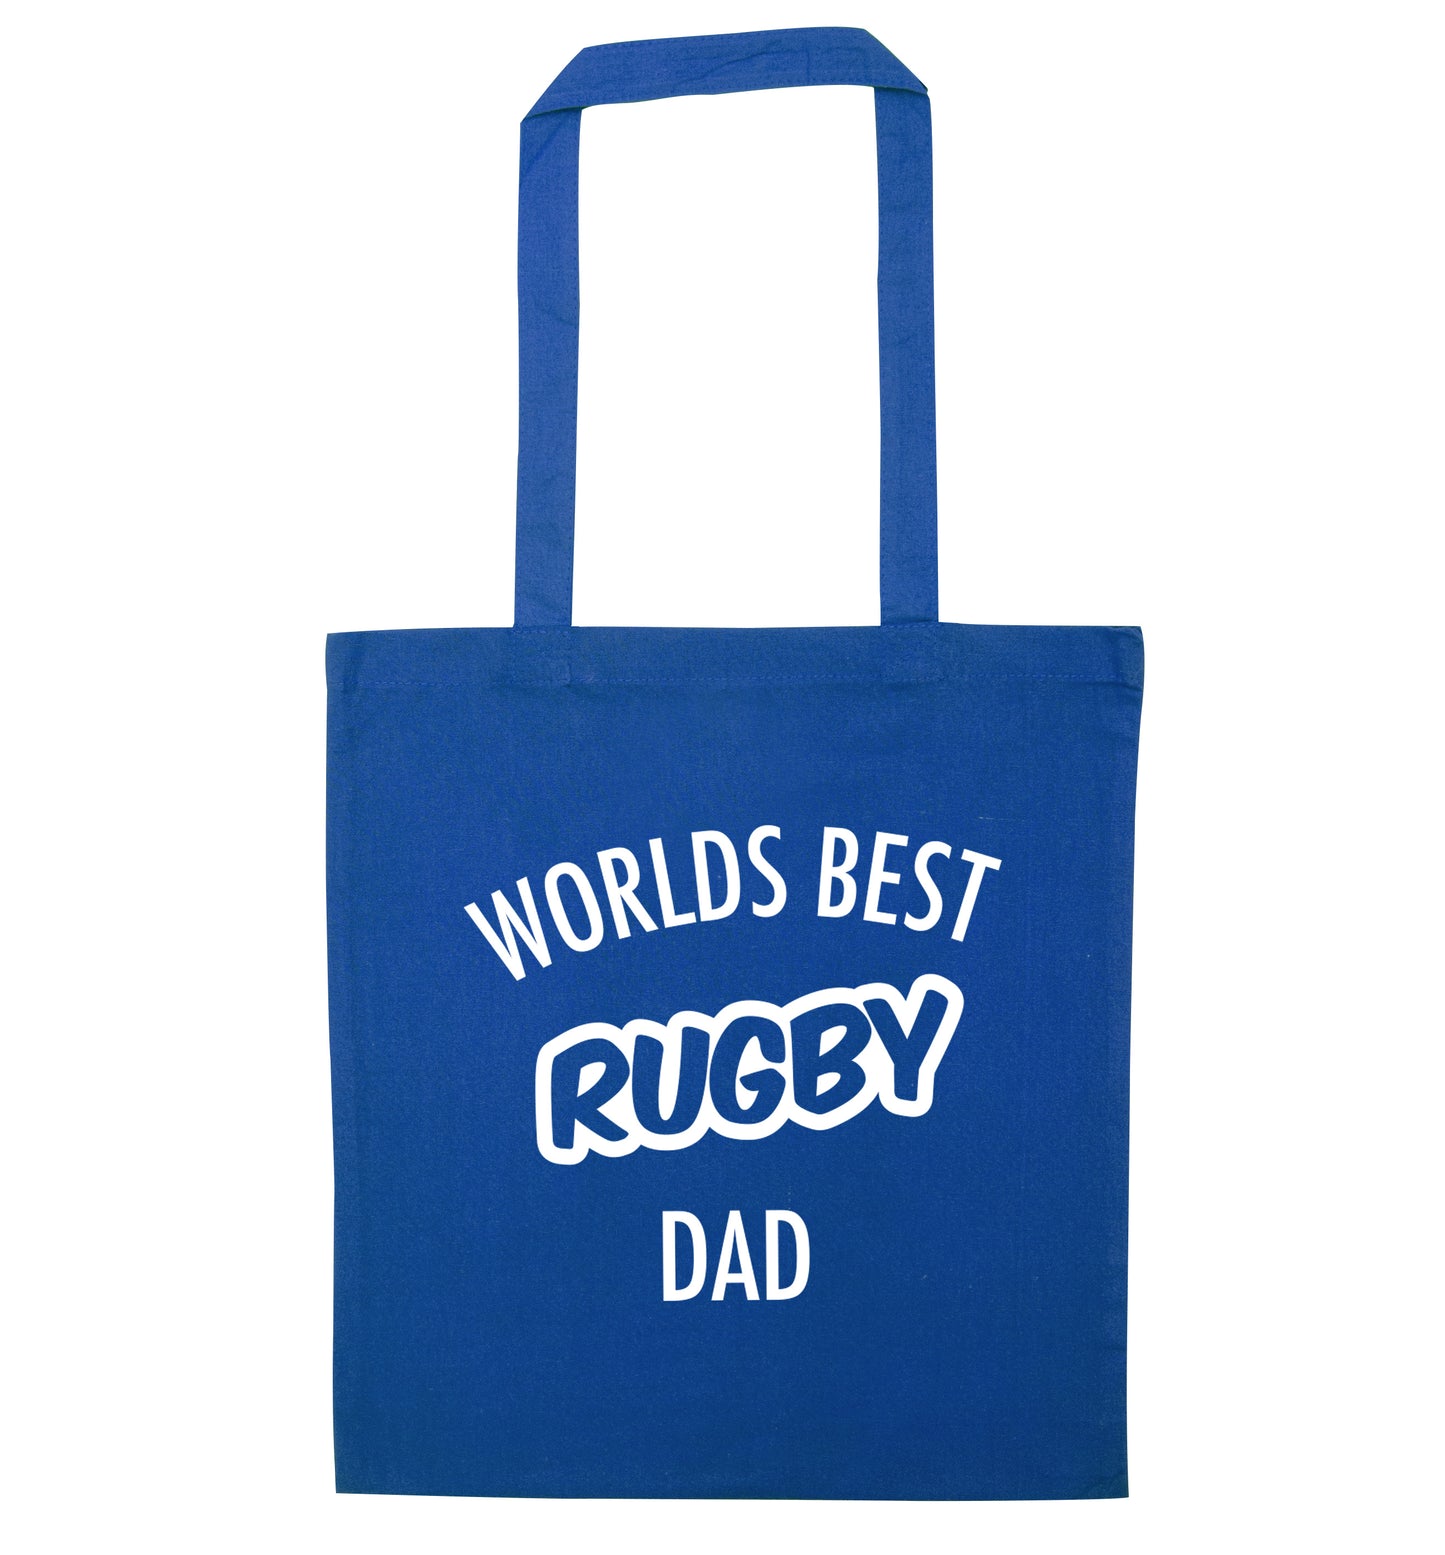 Worlds best rugby dad blue tote bag